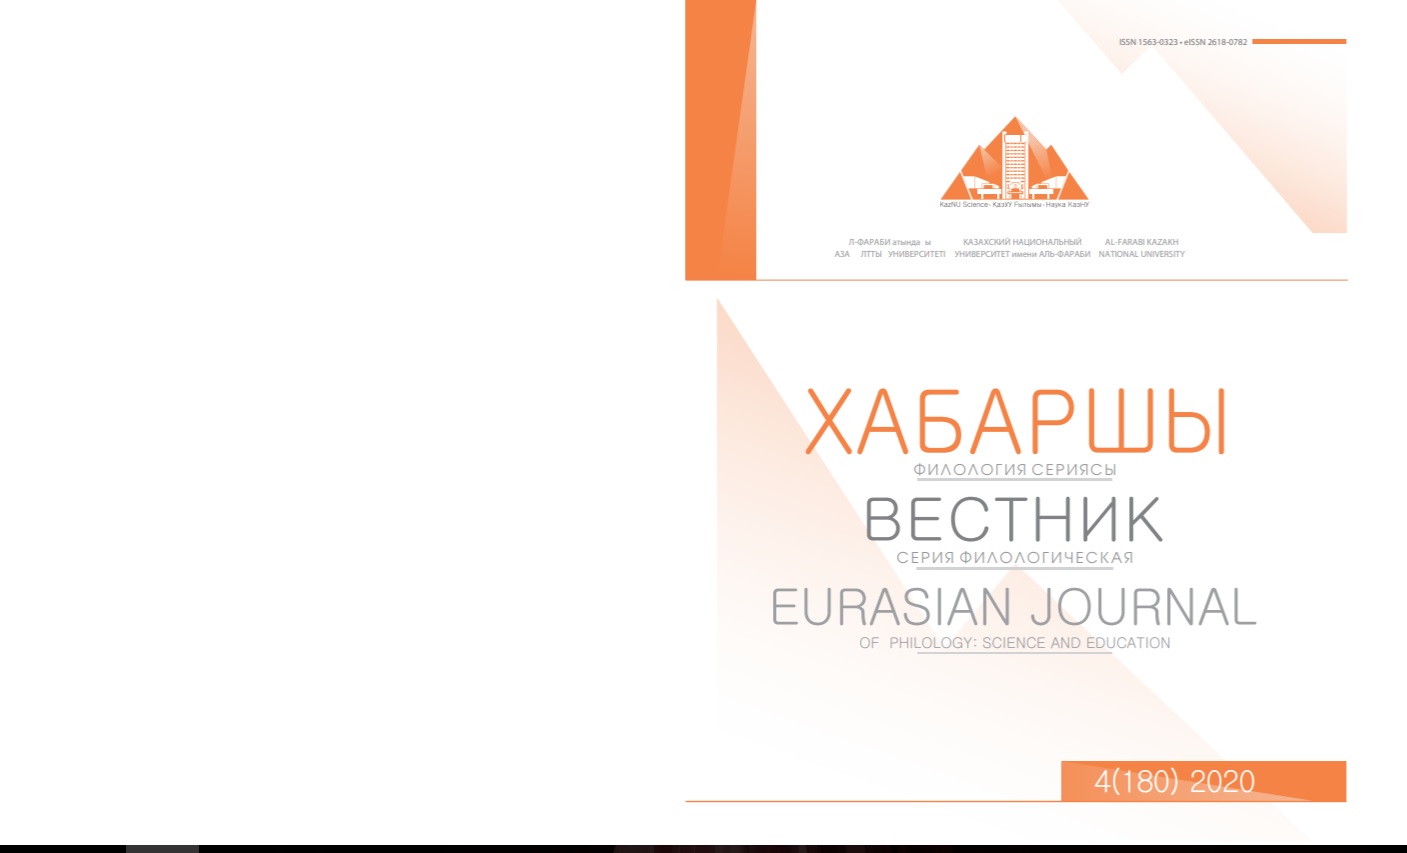 					View Vol. 180 No. 4 (2020): Eurasian Journal of Philology: Science and Education
				